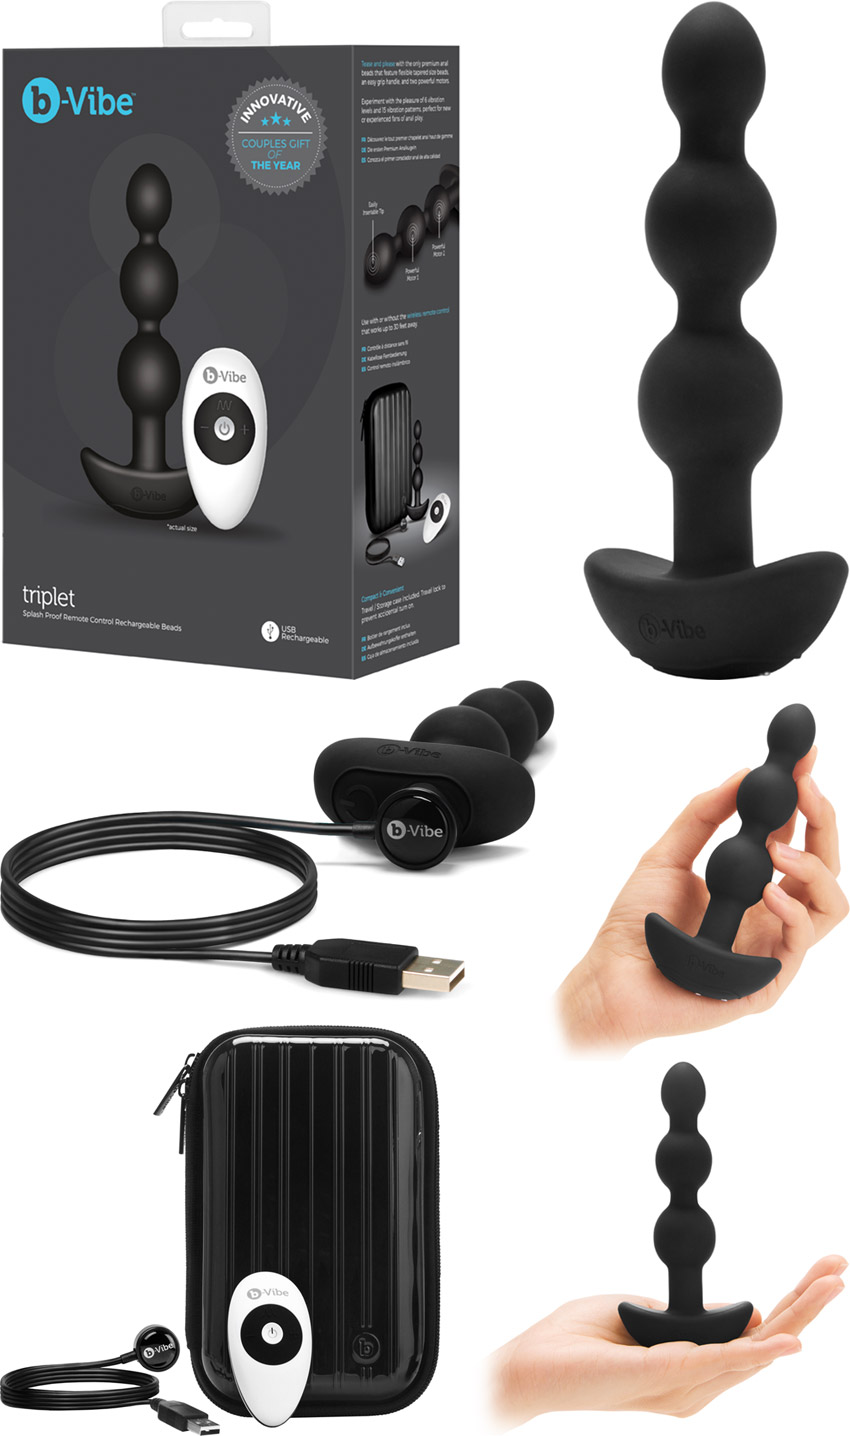 b-Vibe Triplet Remote controlled vibrating anal beads - Black